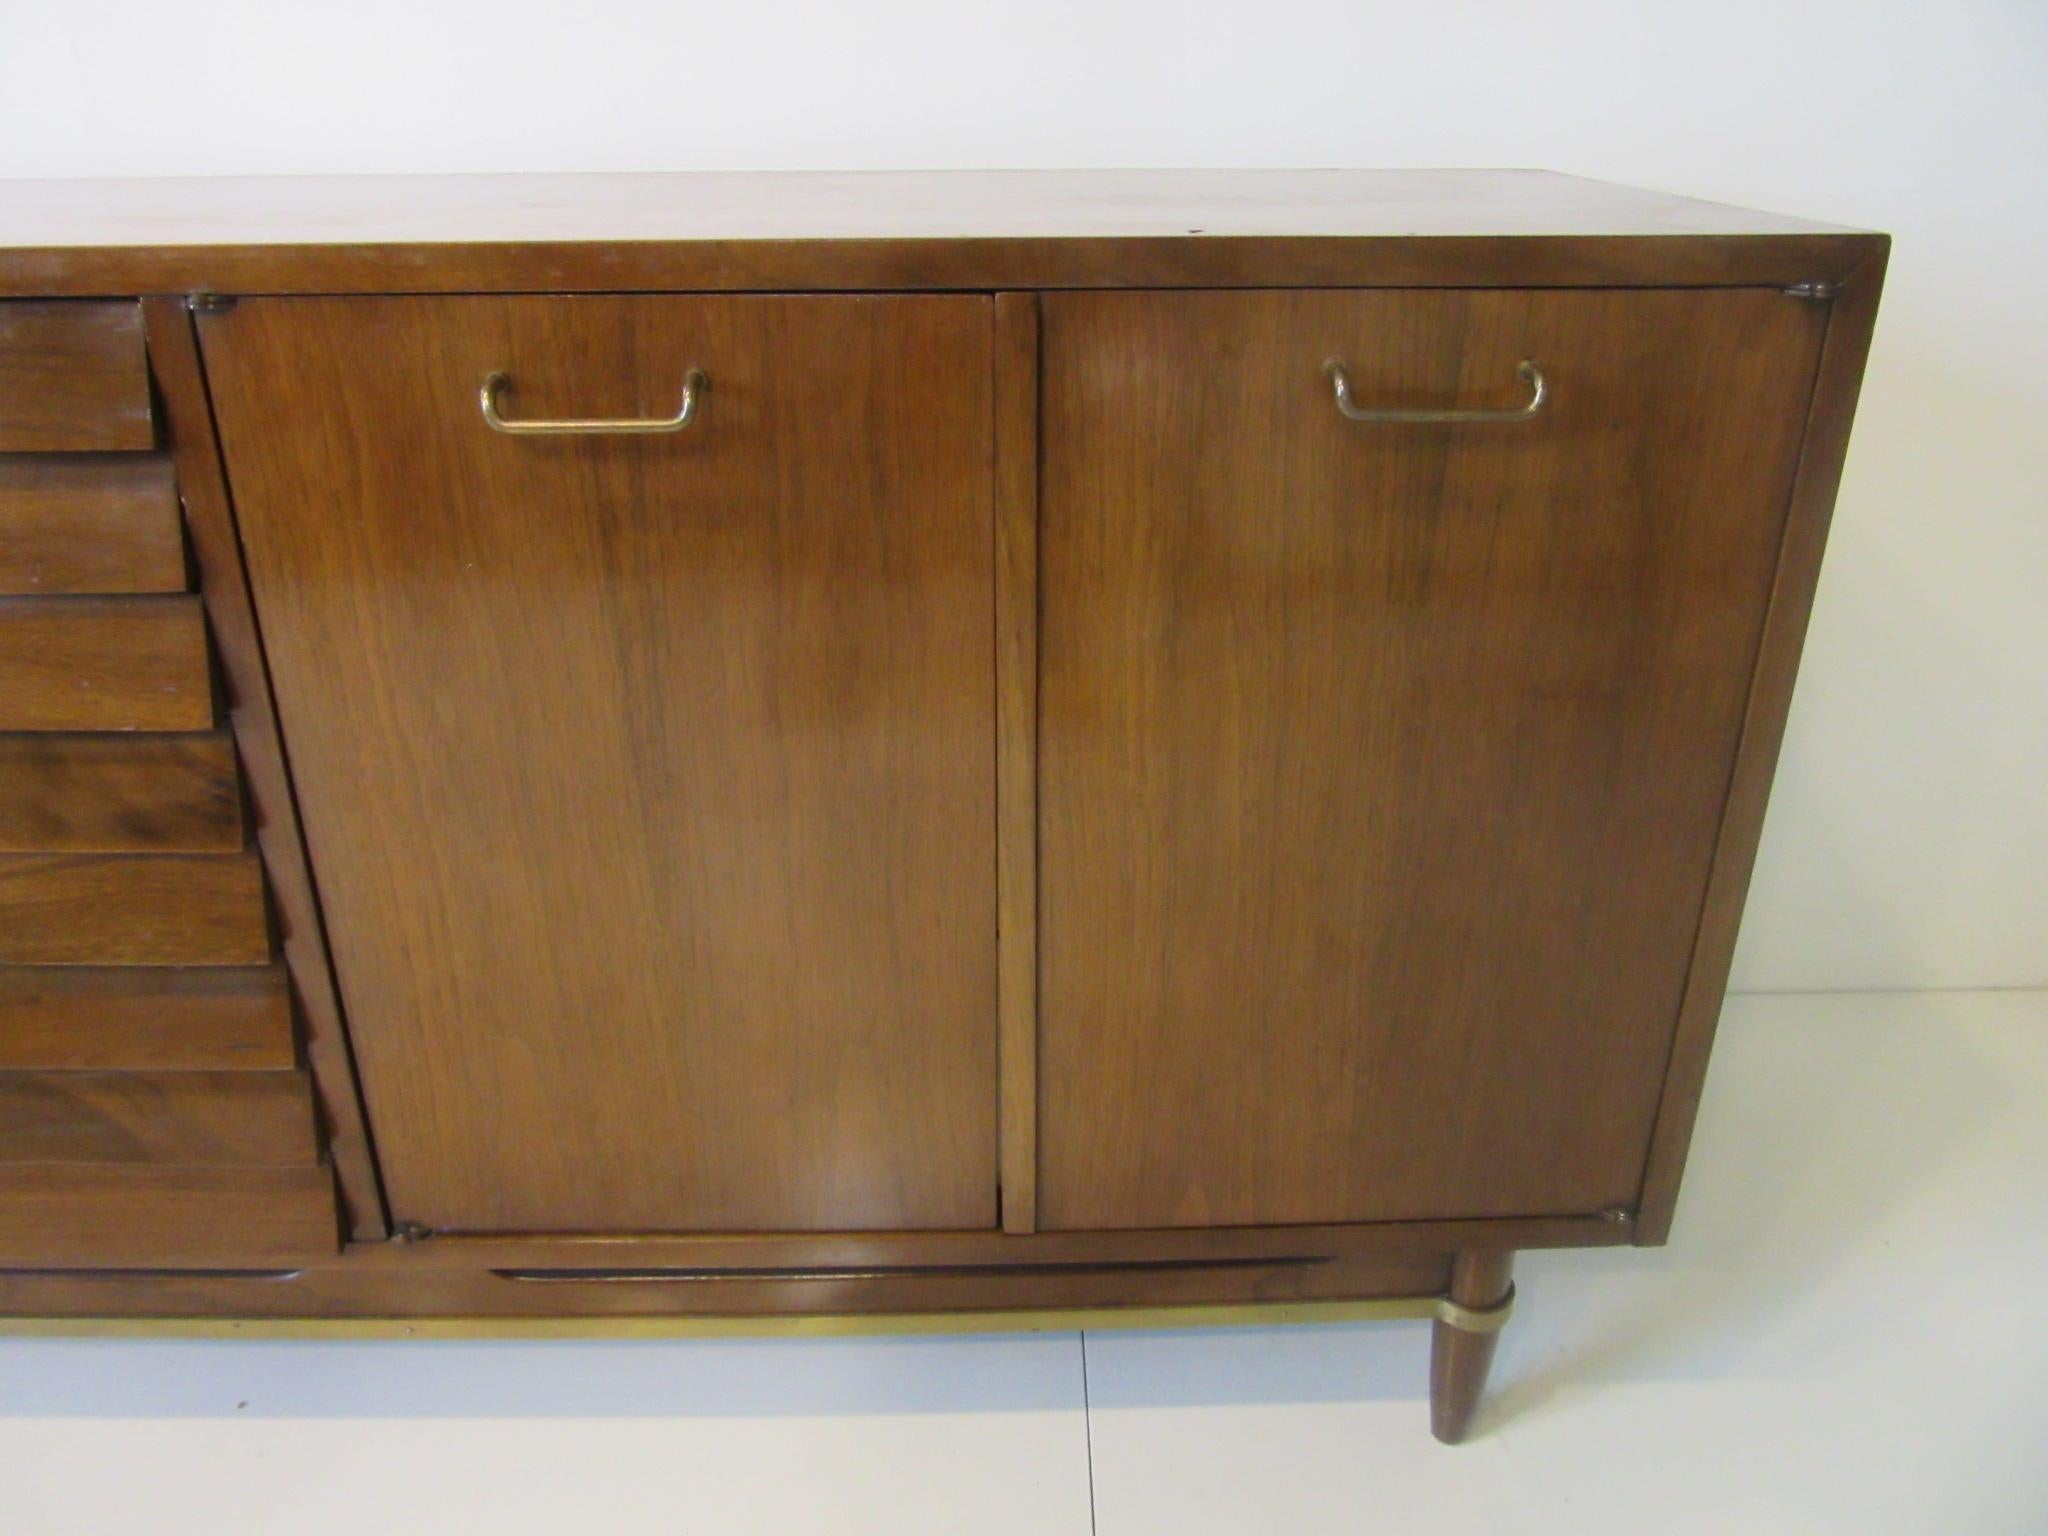 20th Century Midcentury Walnut Credenza / Sideboard by American of Martinsville